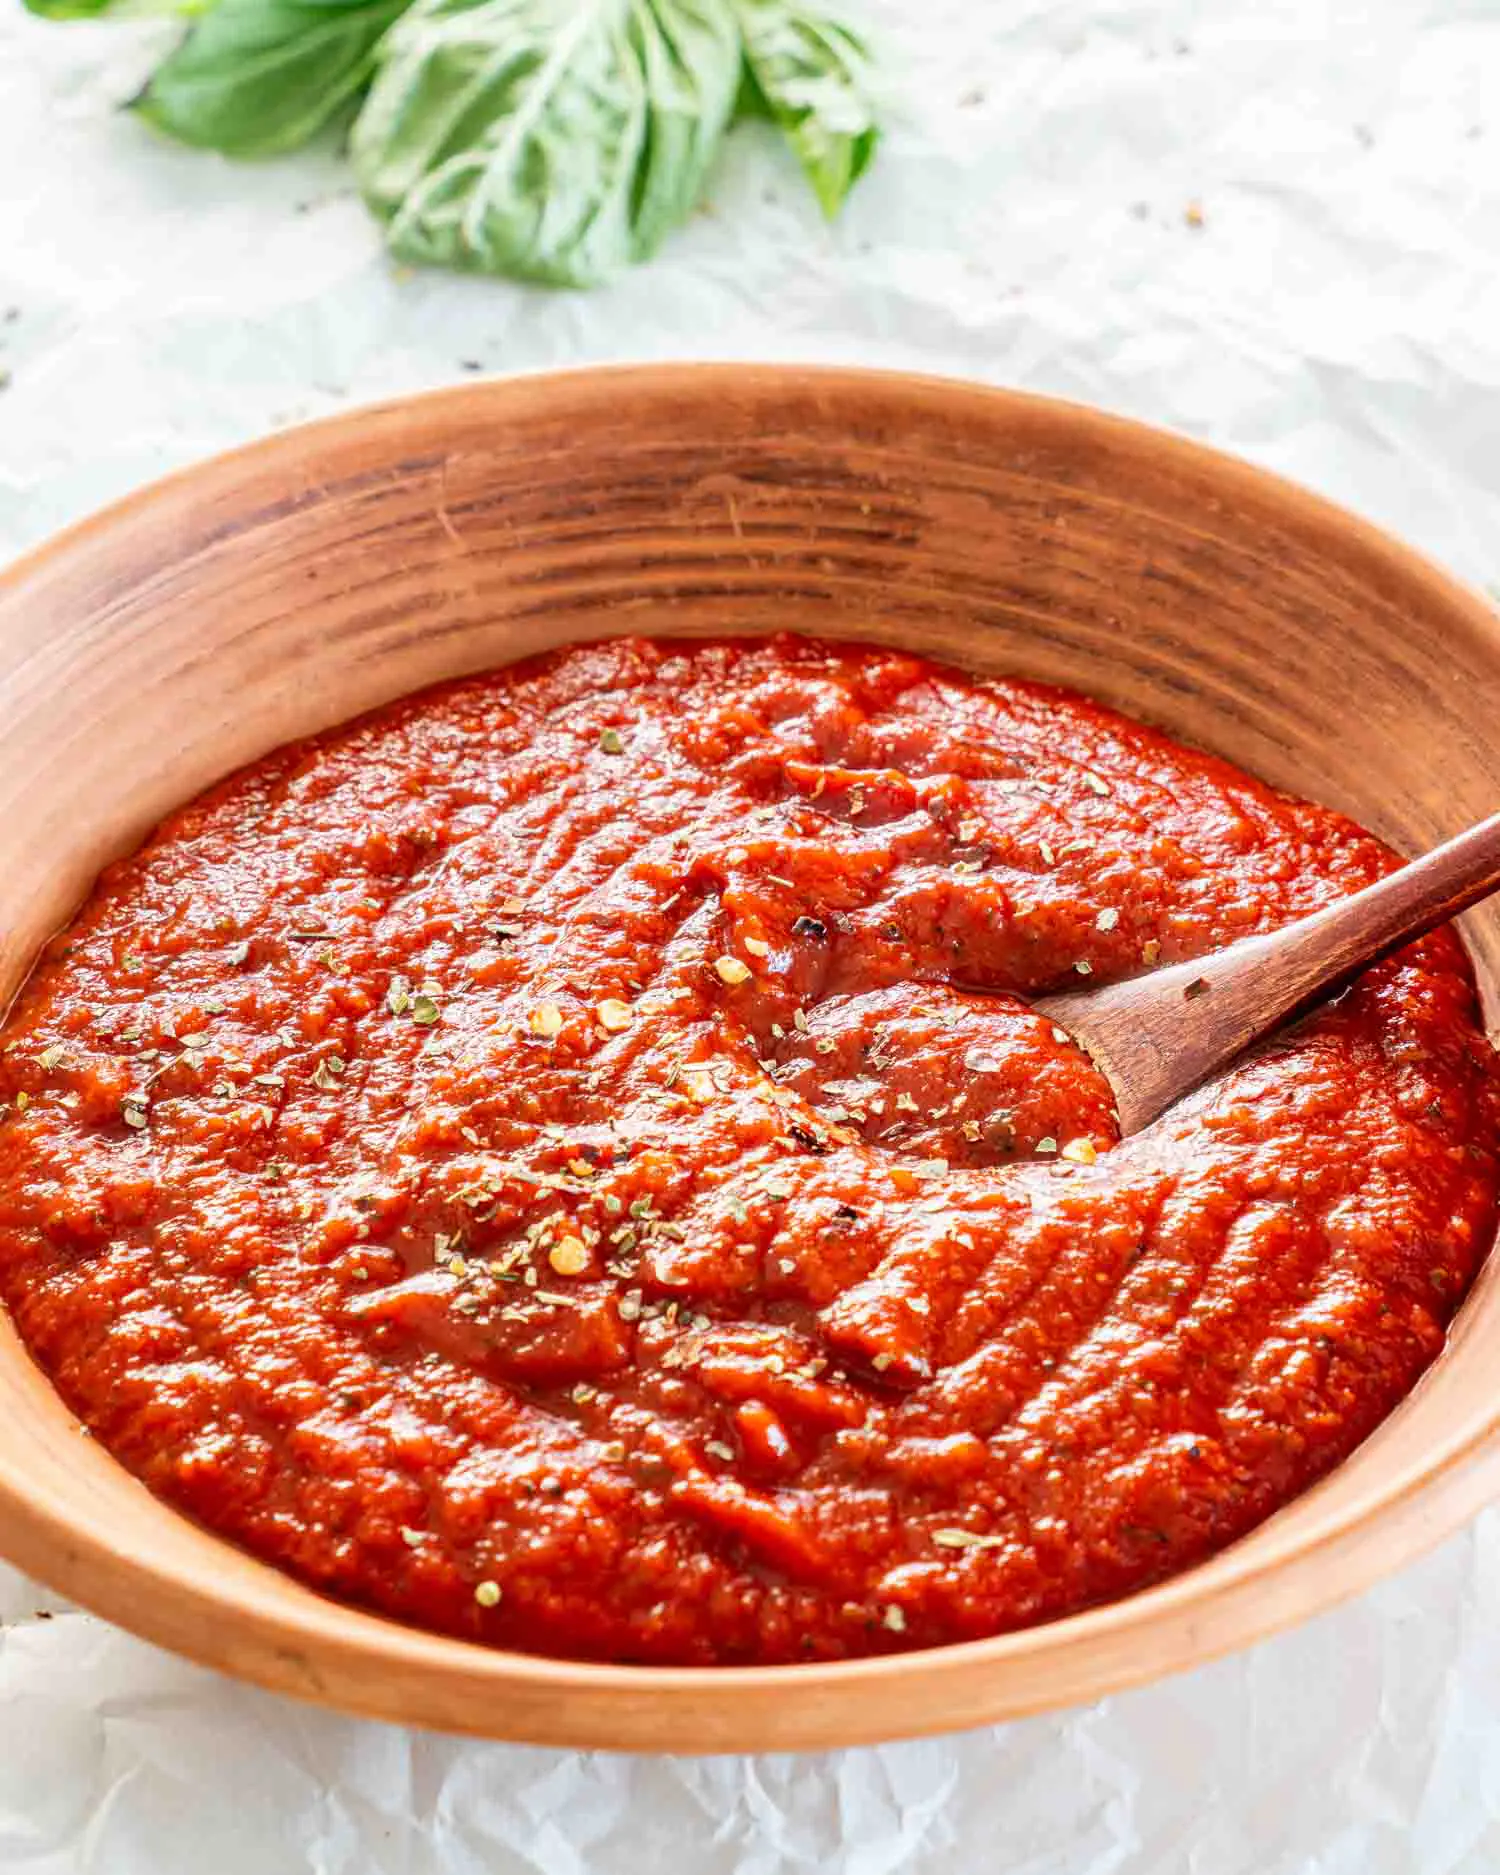 How to Make Pizza Sauce Without Tomato Paste